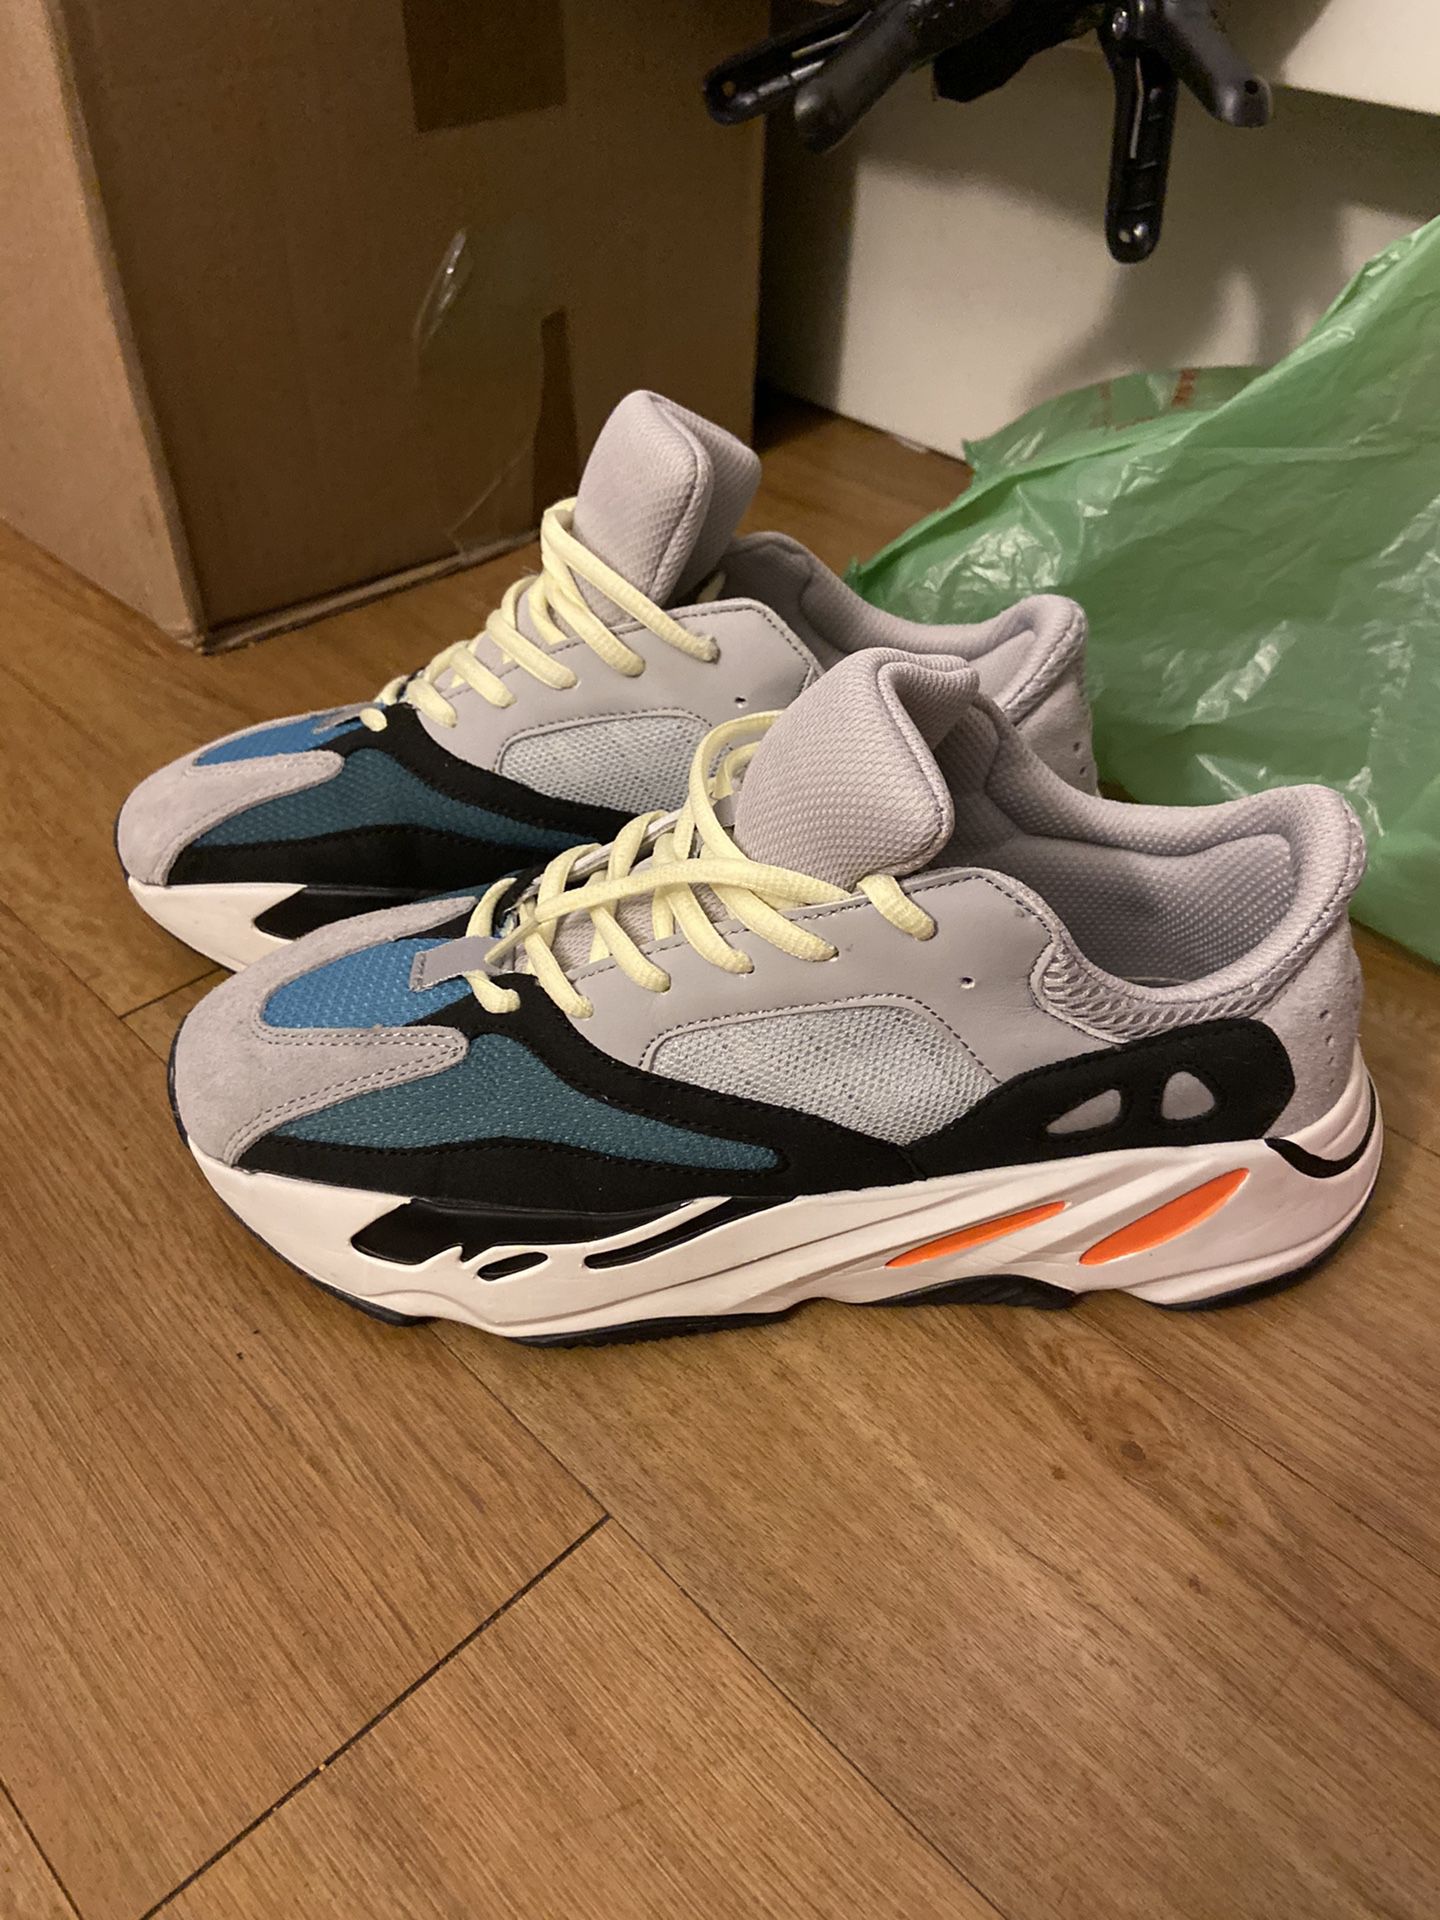 Yeezy 700 (wave runners) size 9.5